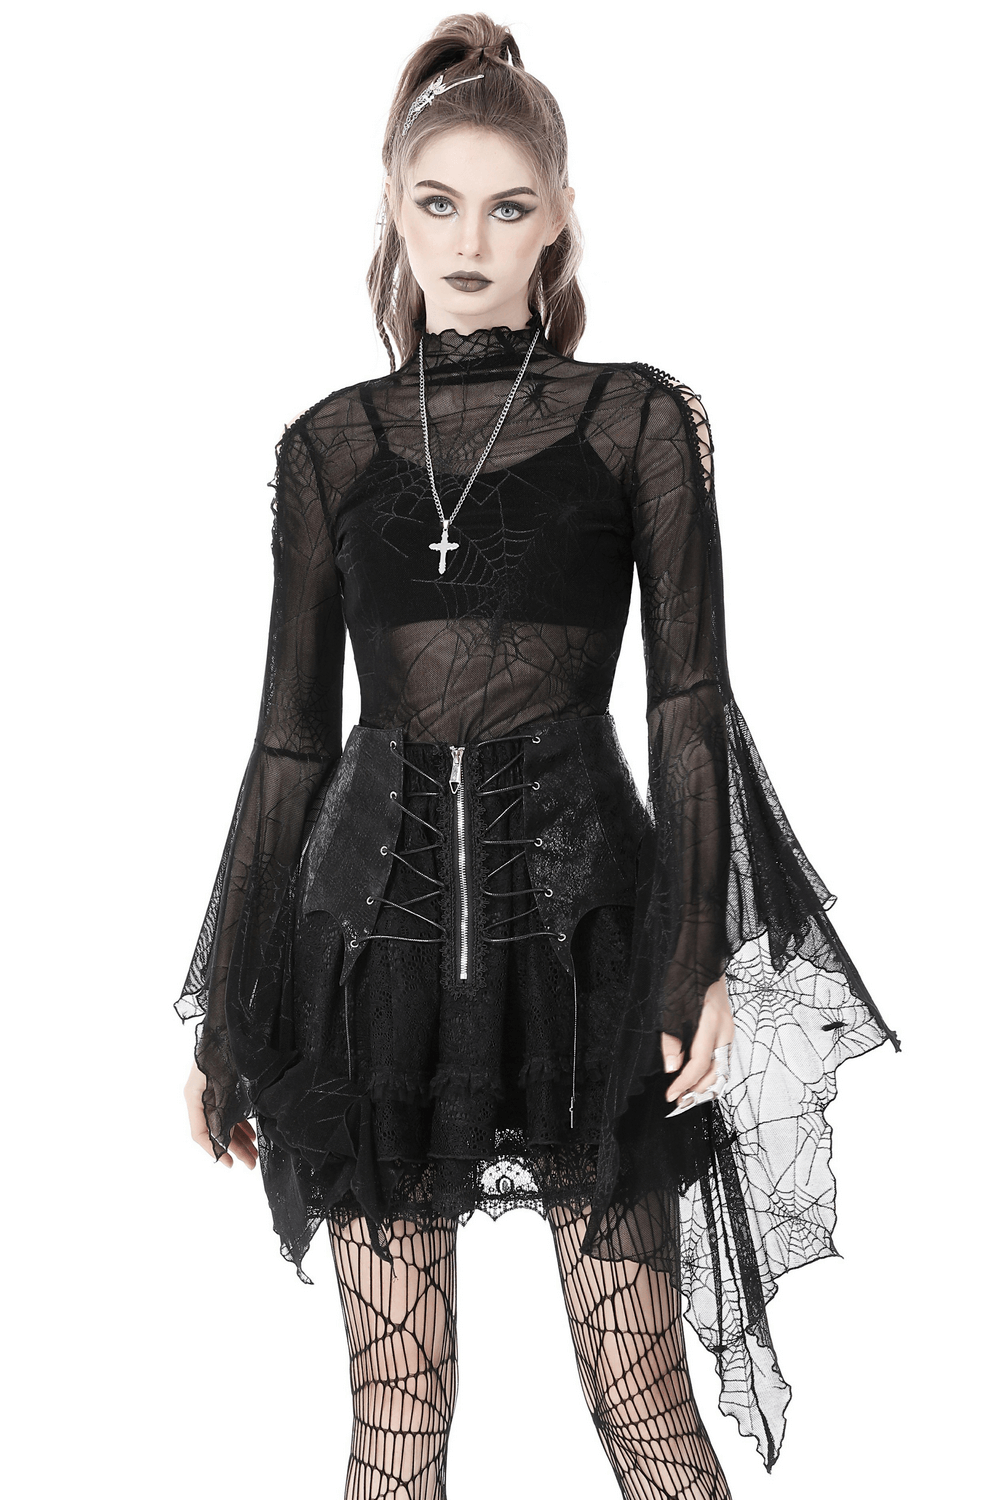 Gothic Women's Mesh Spiderweb Top with Long Sleeves